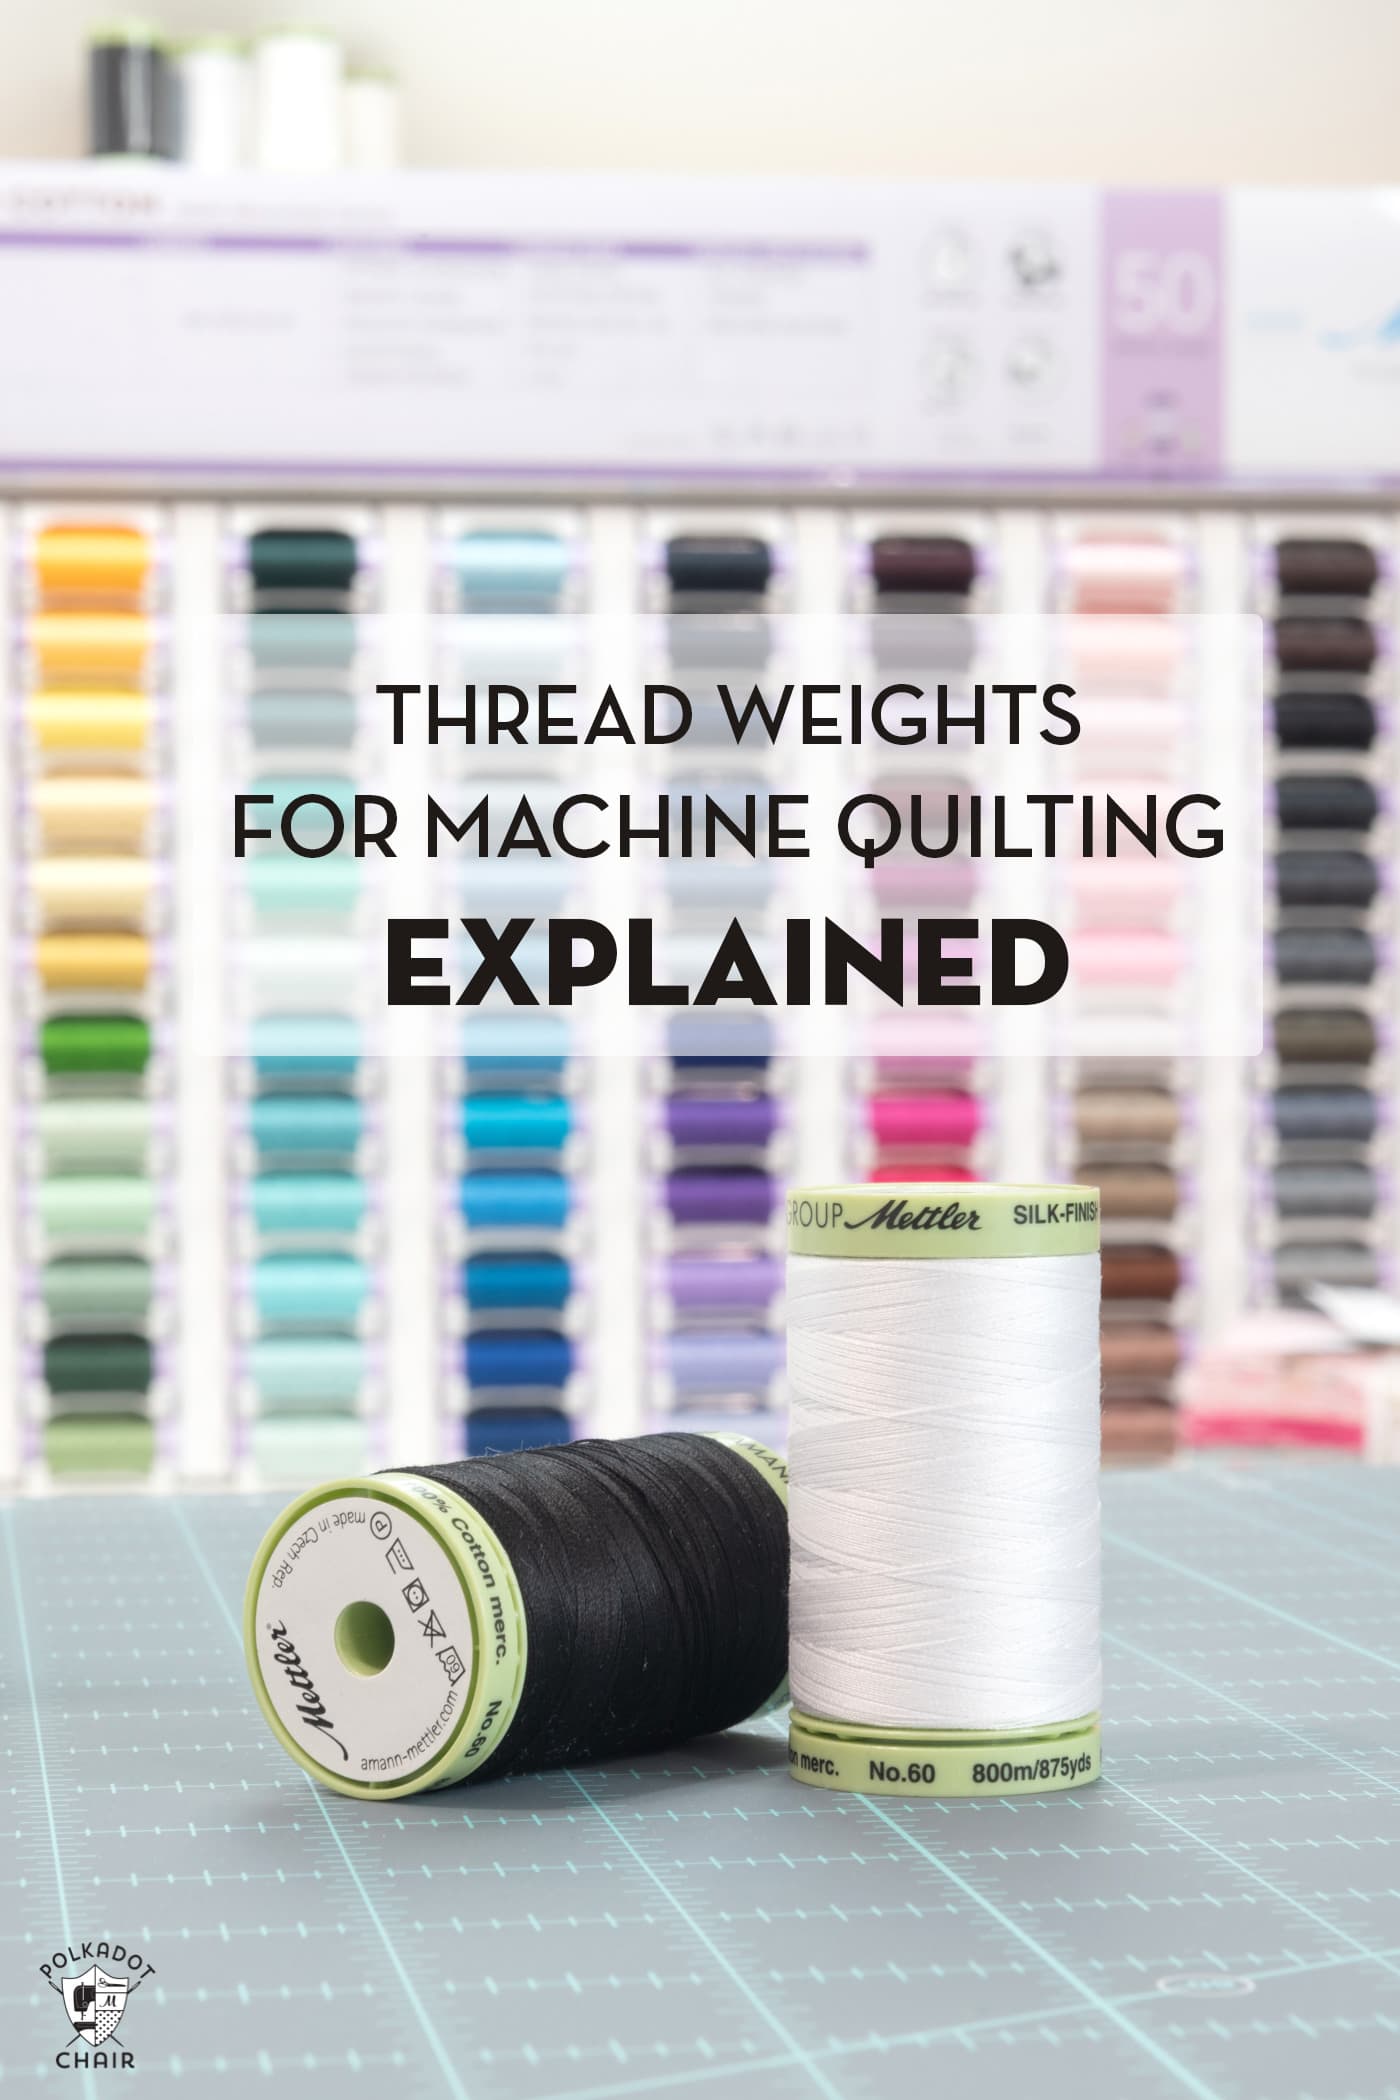 Thread Weights Used In Machine Quilting Explained - The Polka Dot Chair